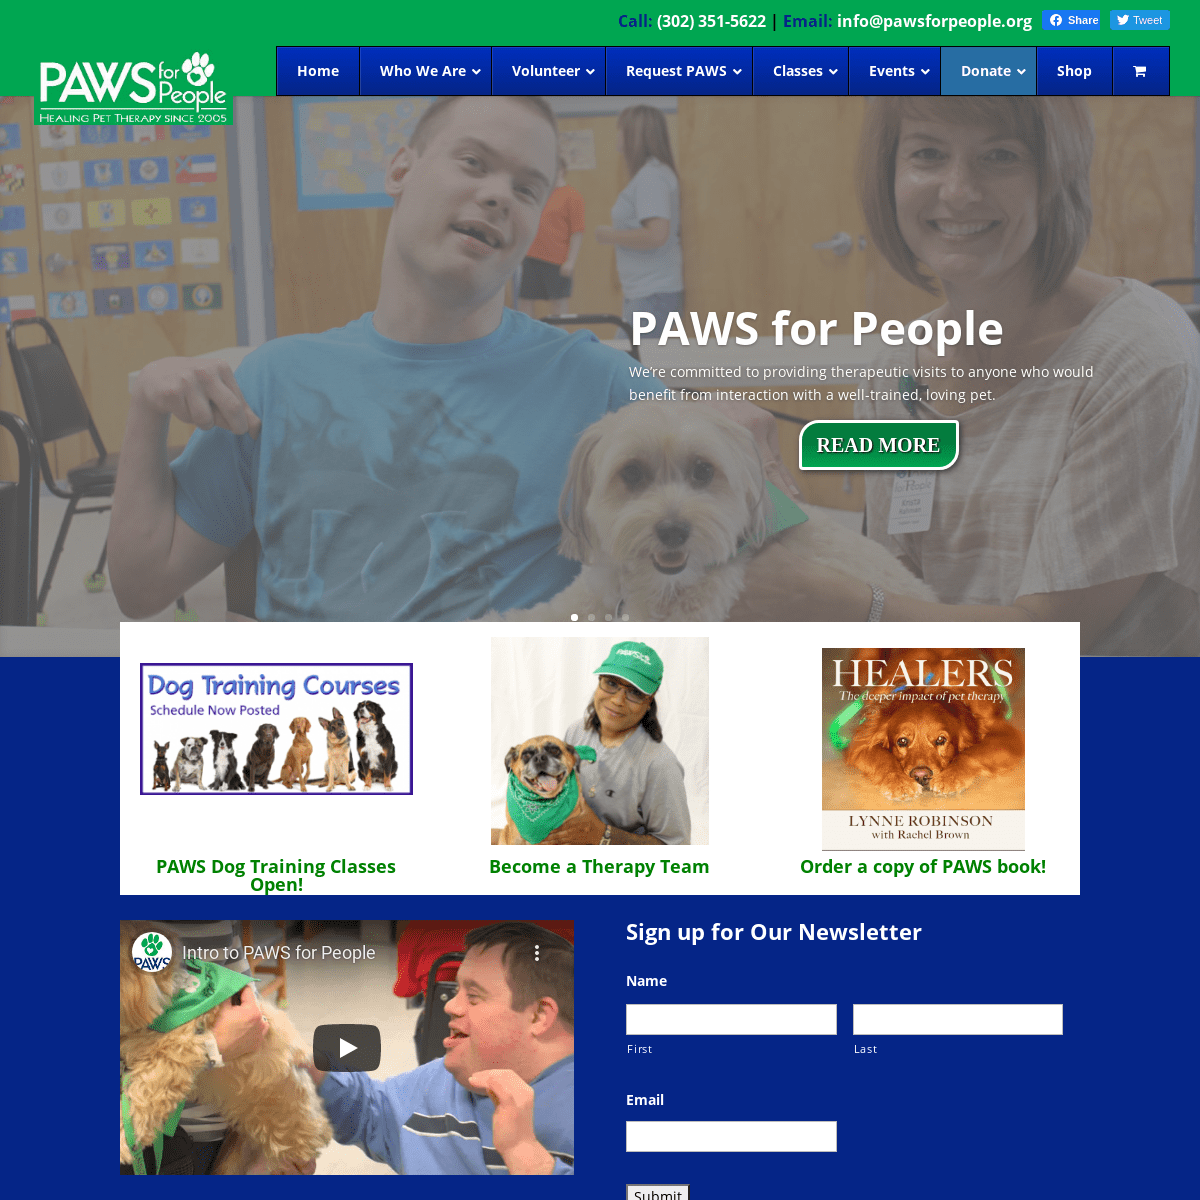 A complete backup of https://pawsforpeople.org